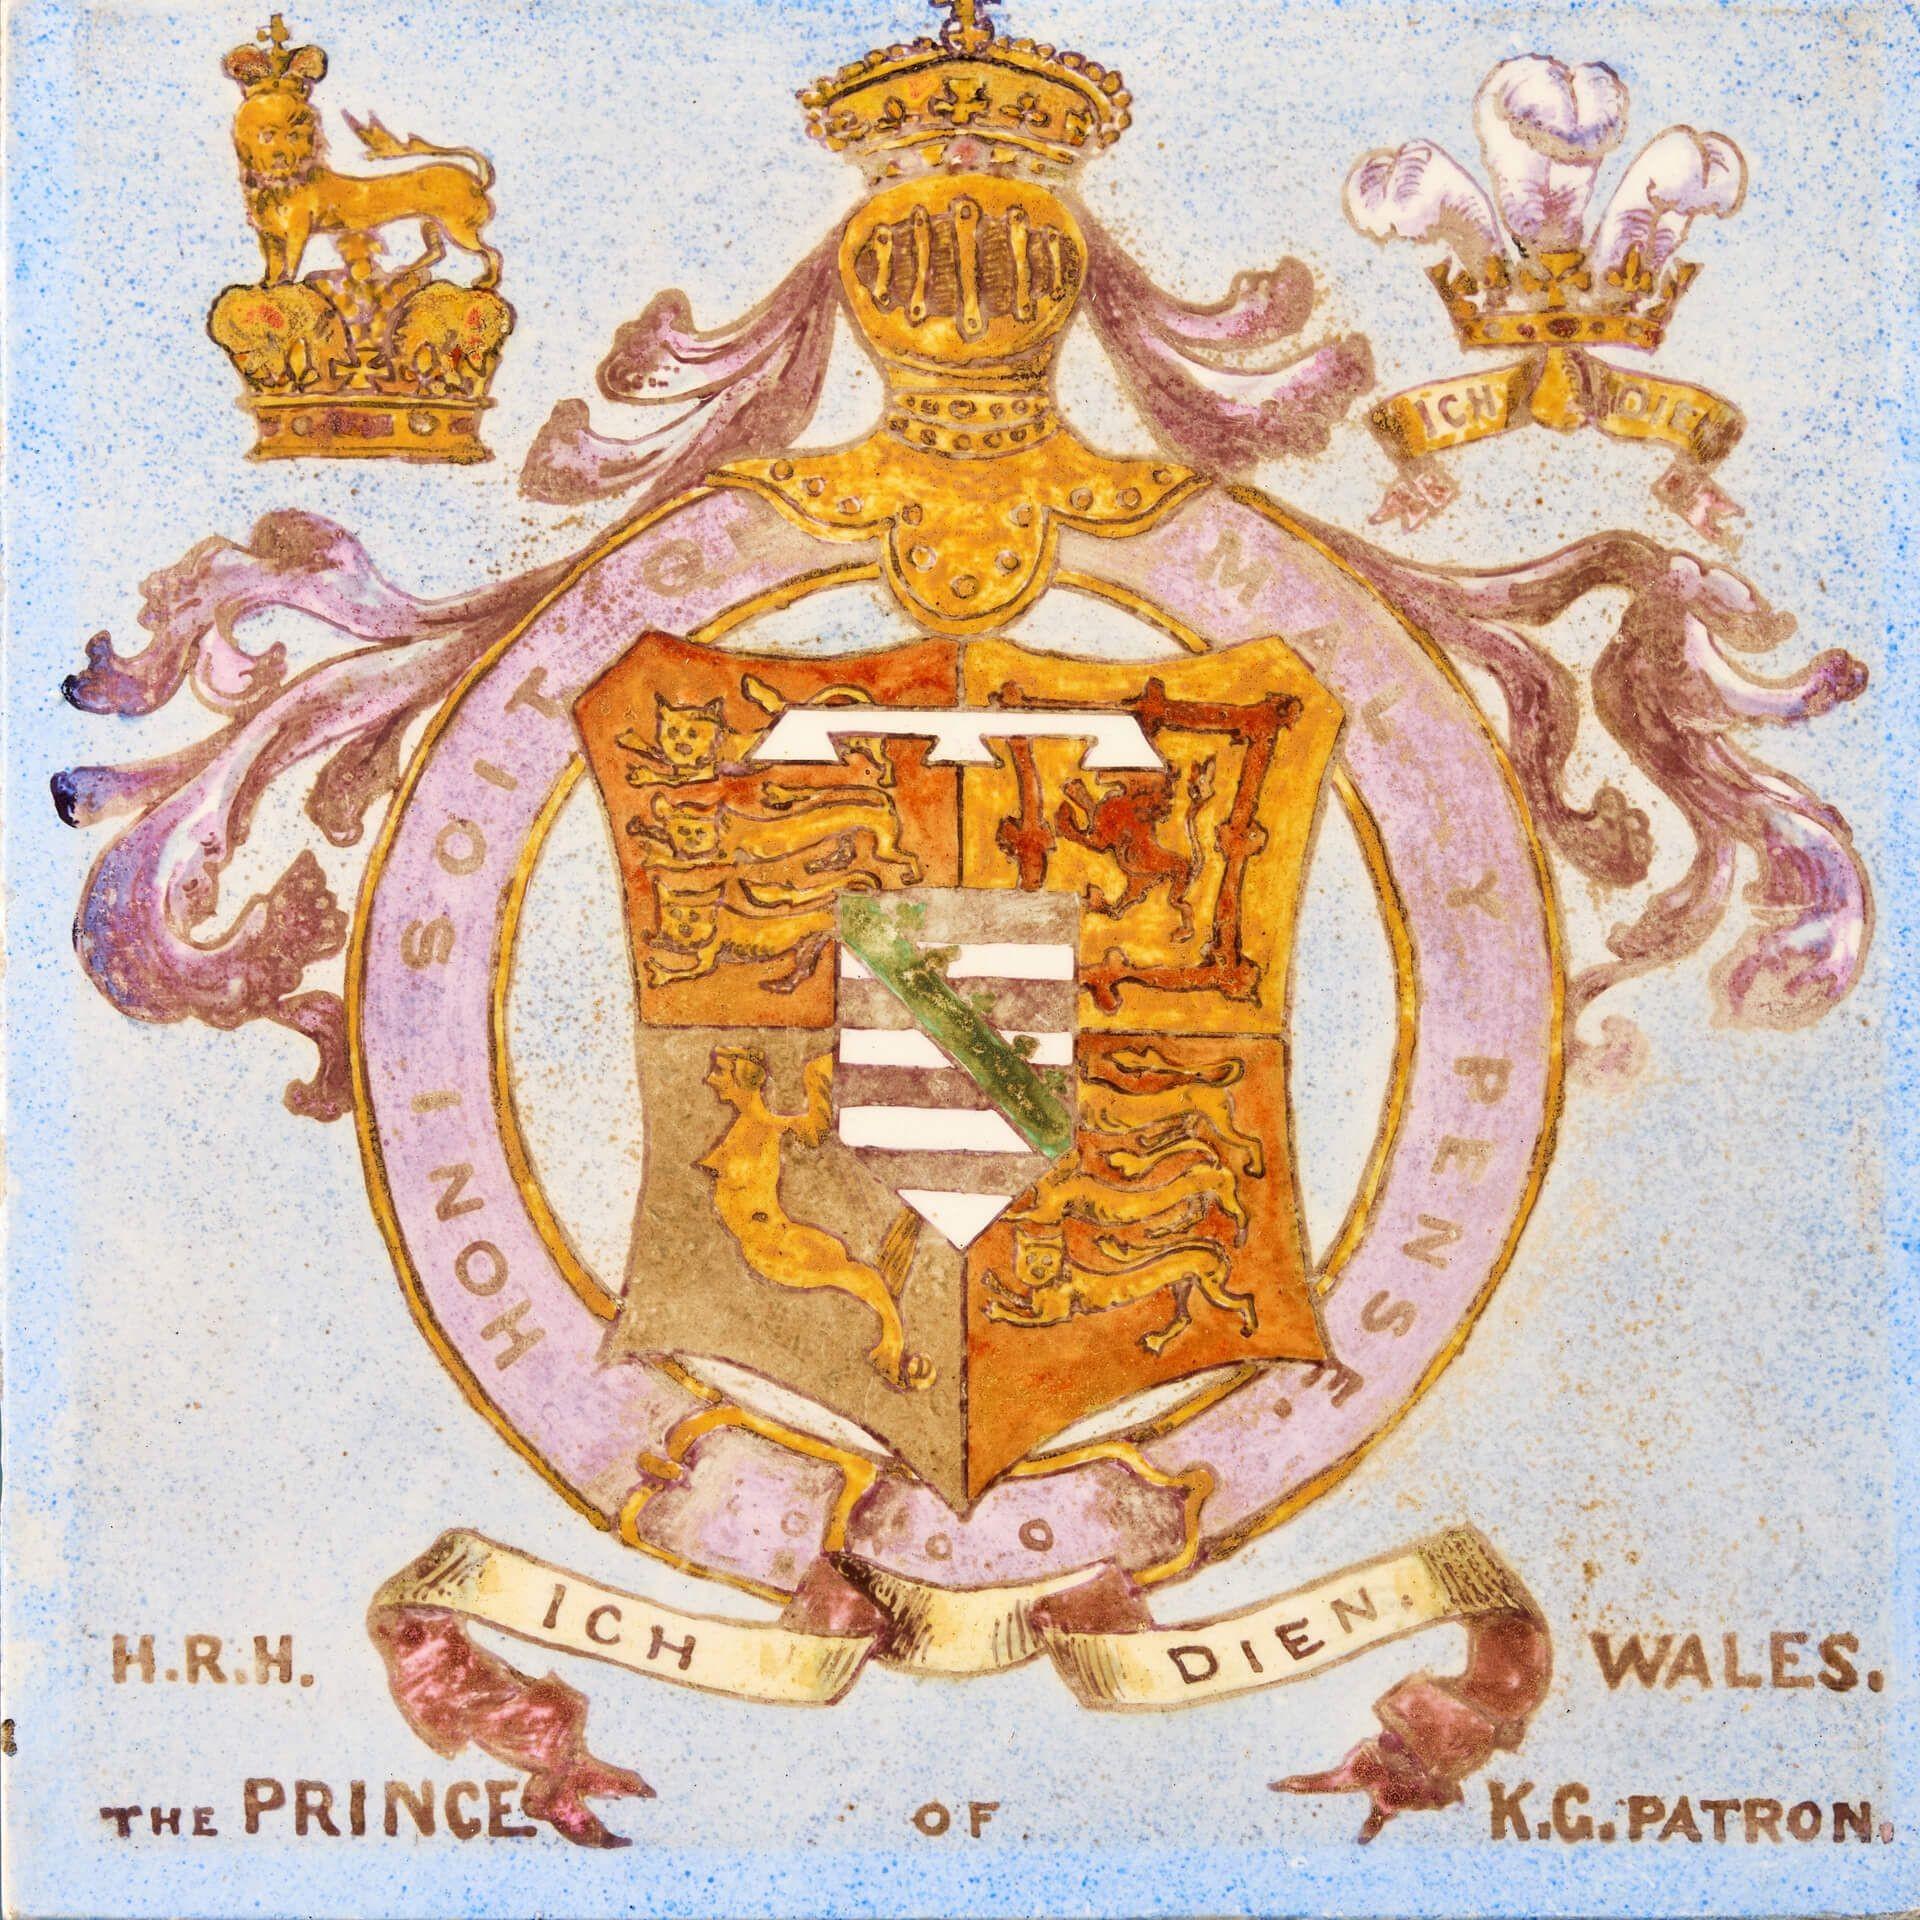 A hand decorated antique English heraldic tile depicting the coat of arms of Albert Edward, Prince of Wales (later Edward VII), dating from 1881. This porcelain tile is one of 14 similar we are selling, removed from the now demolished library of the